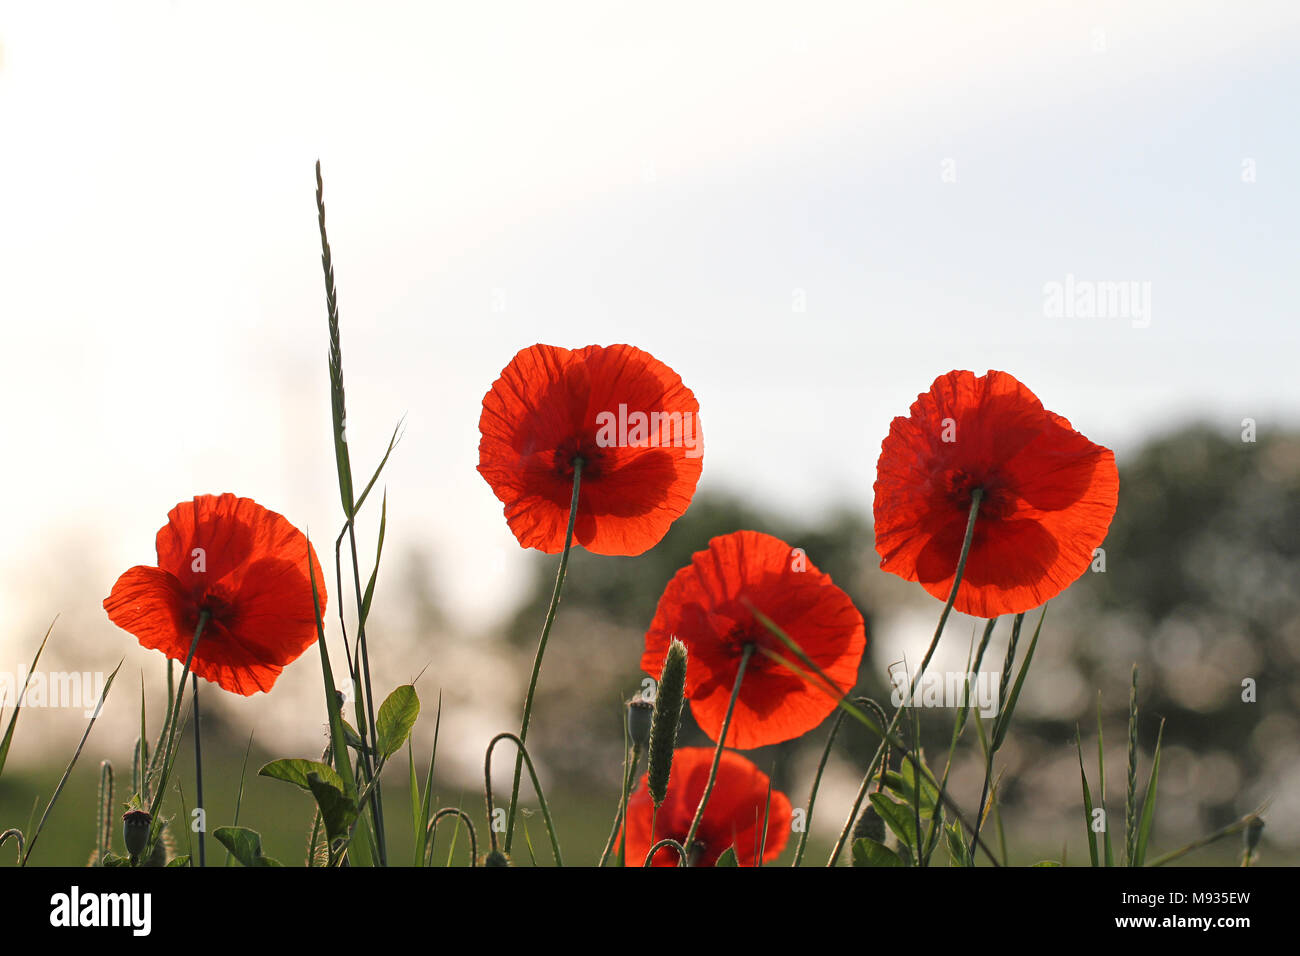 Poppy flowers or papaver dubium poppies with the light behind remembrance flower first world war remembering Flanders fields poem by John McCrae Stock Photo